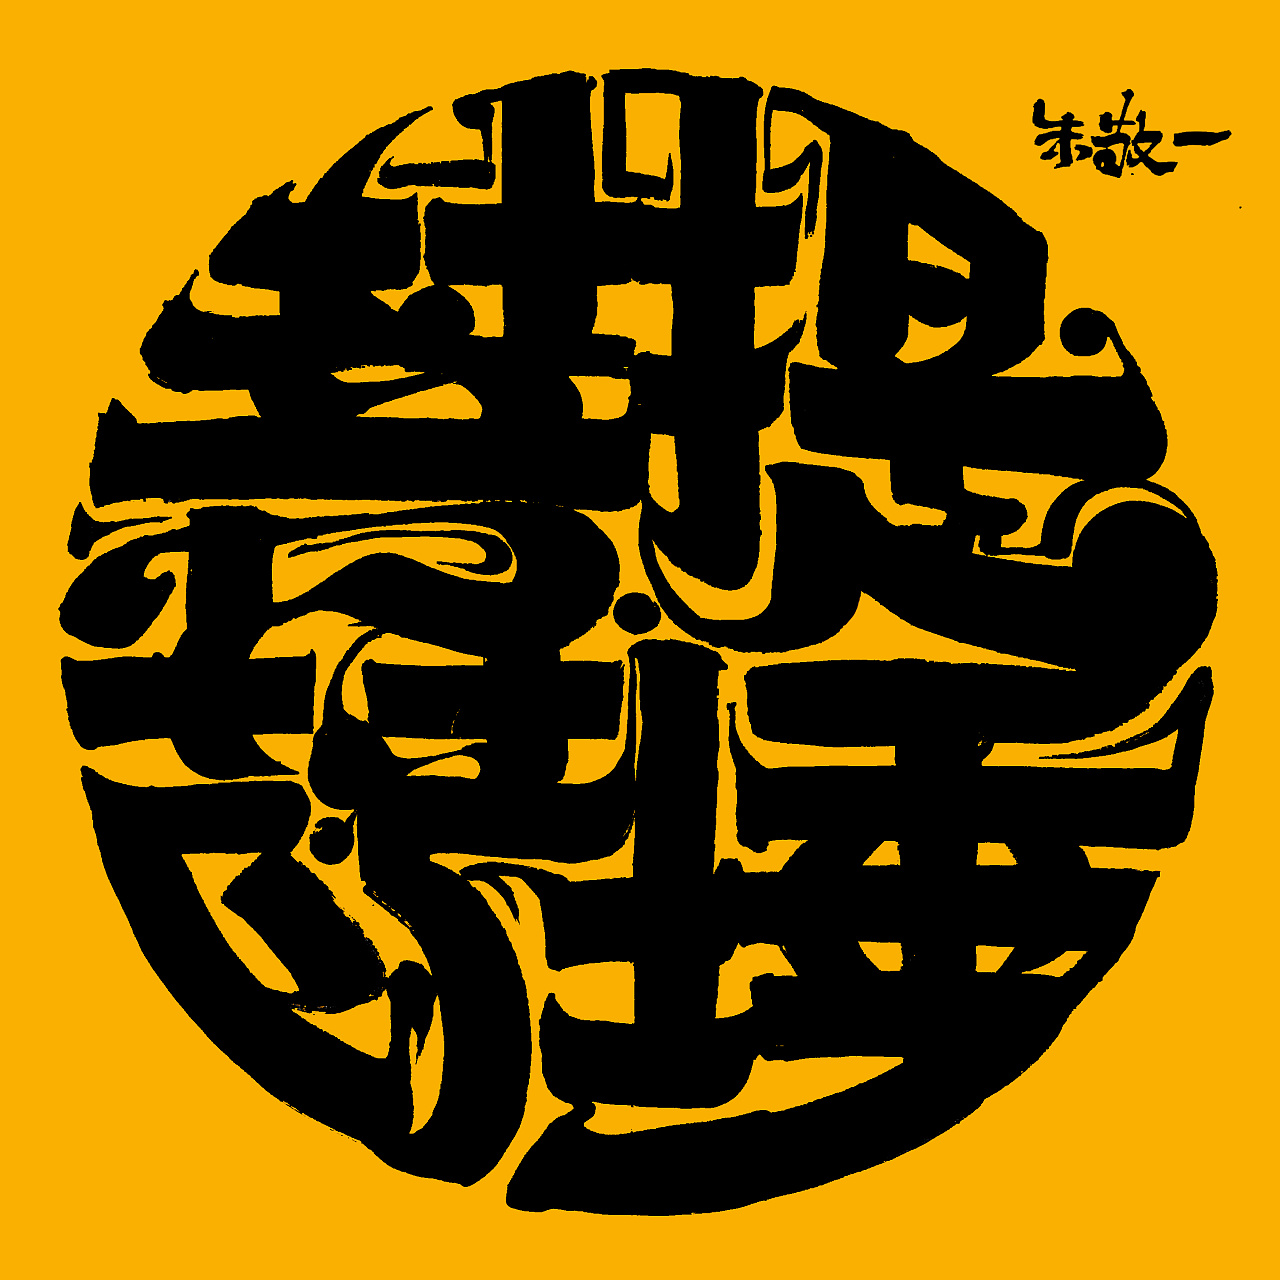 Chinese Creative Font Design-Zhu jingyi brushes the round characters of calligraphy with a board.